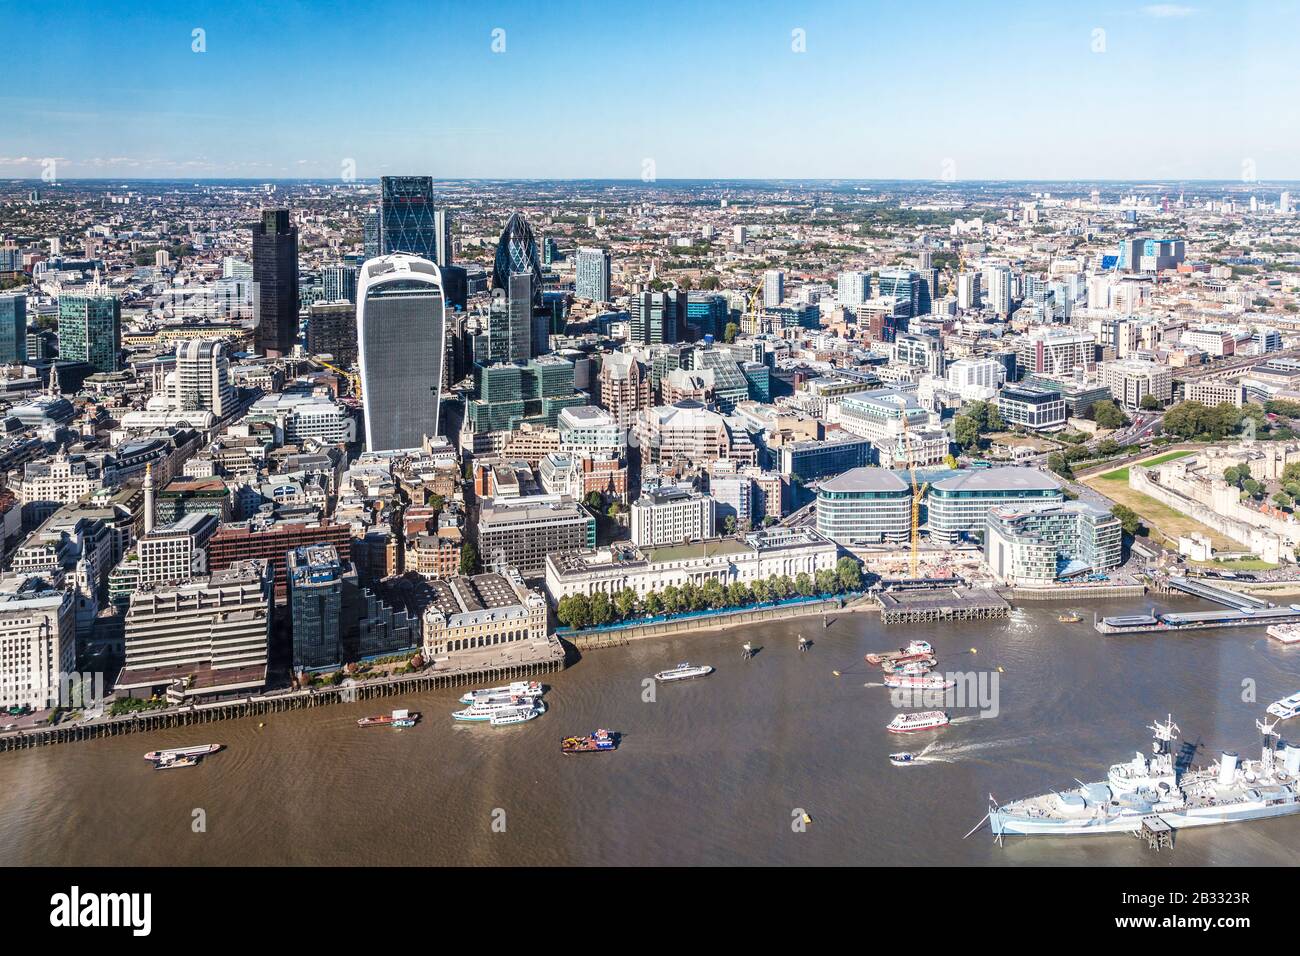 View over the City of London financial district with Tower 42, the Walkie-Talkie, Cheesegrater, the Gherkin  and the Willis Building skyscrapers. Stock Photo